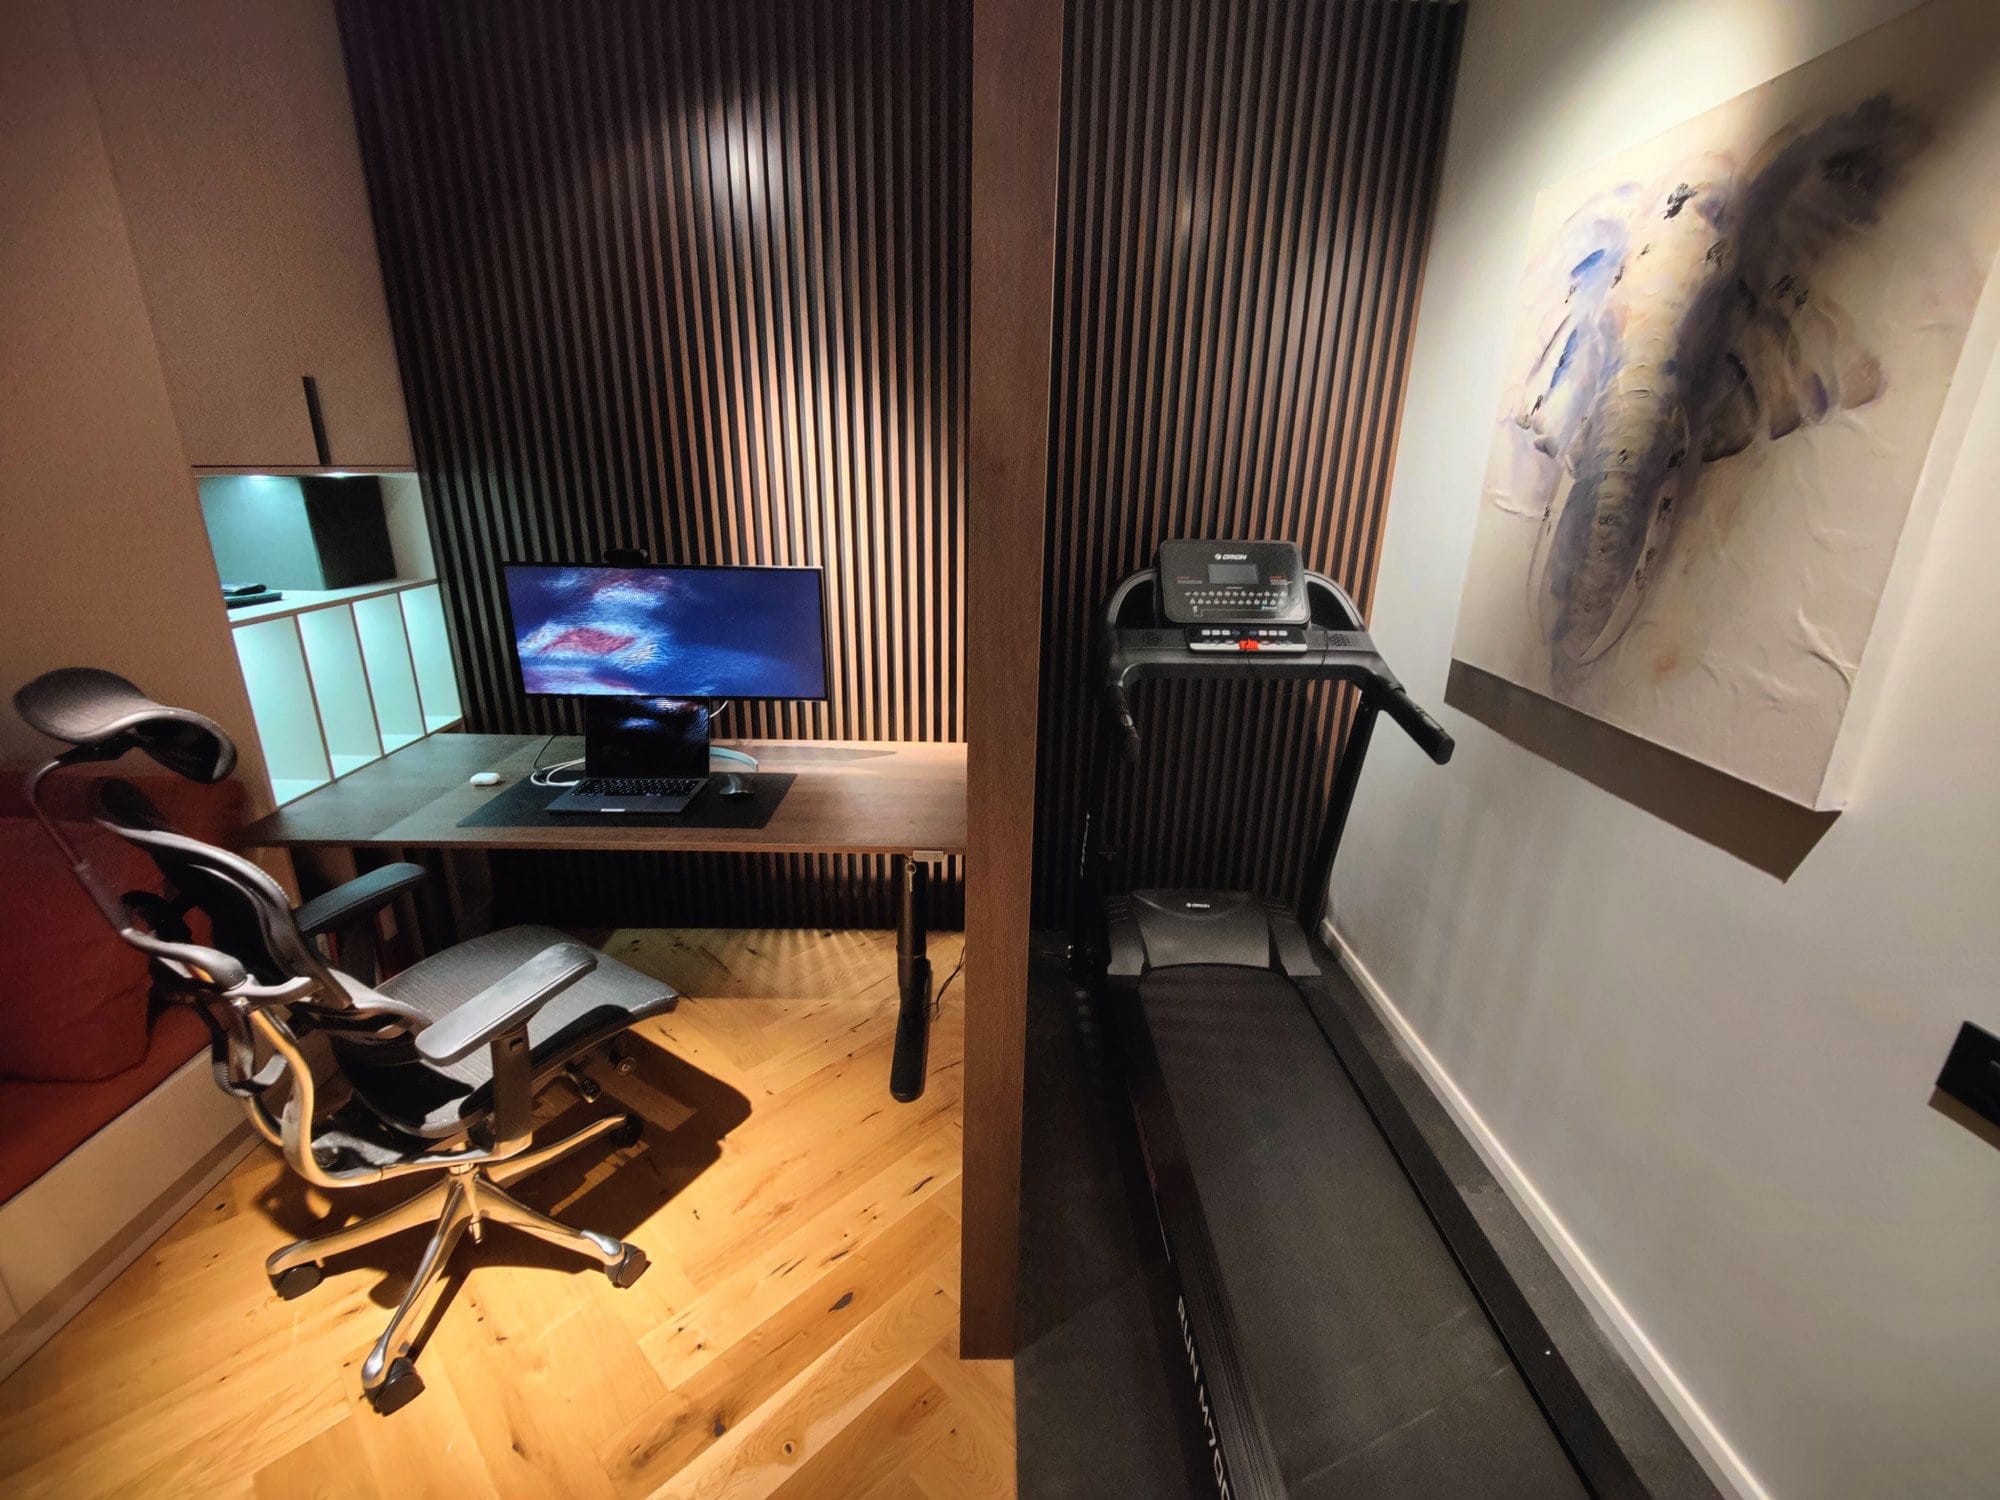 A home office corner with a sleek desk and ergonomic chair, a monitor displaying a cosmic image, adjacent to a treadmill, against a backdrop of vertical wooden slats and an elephant painting